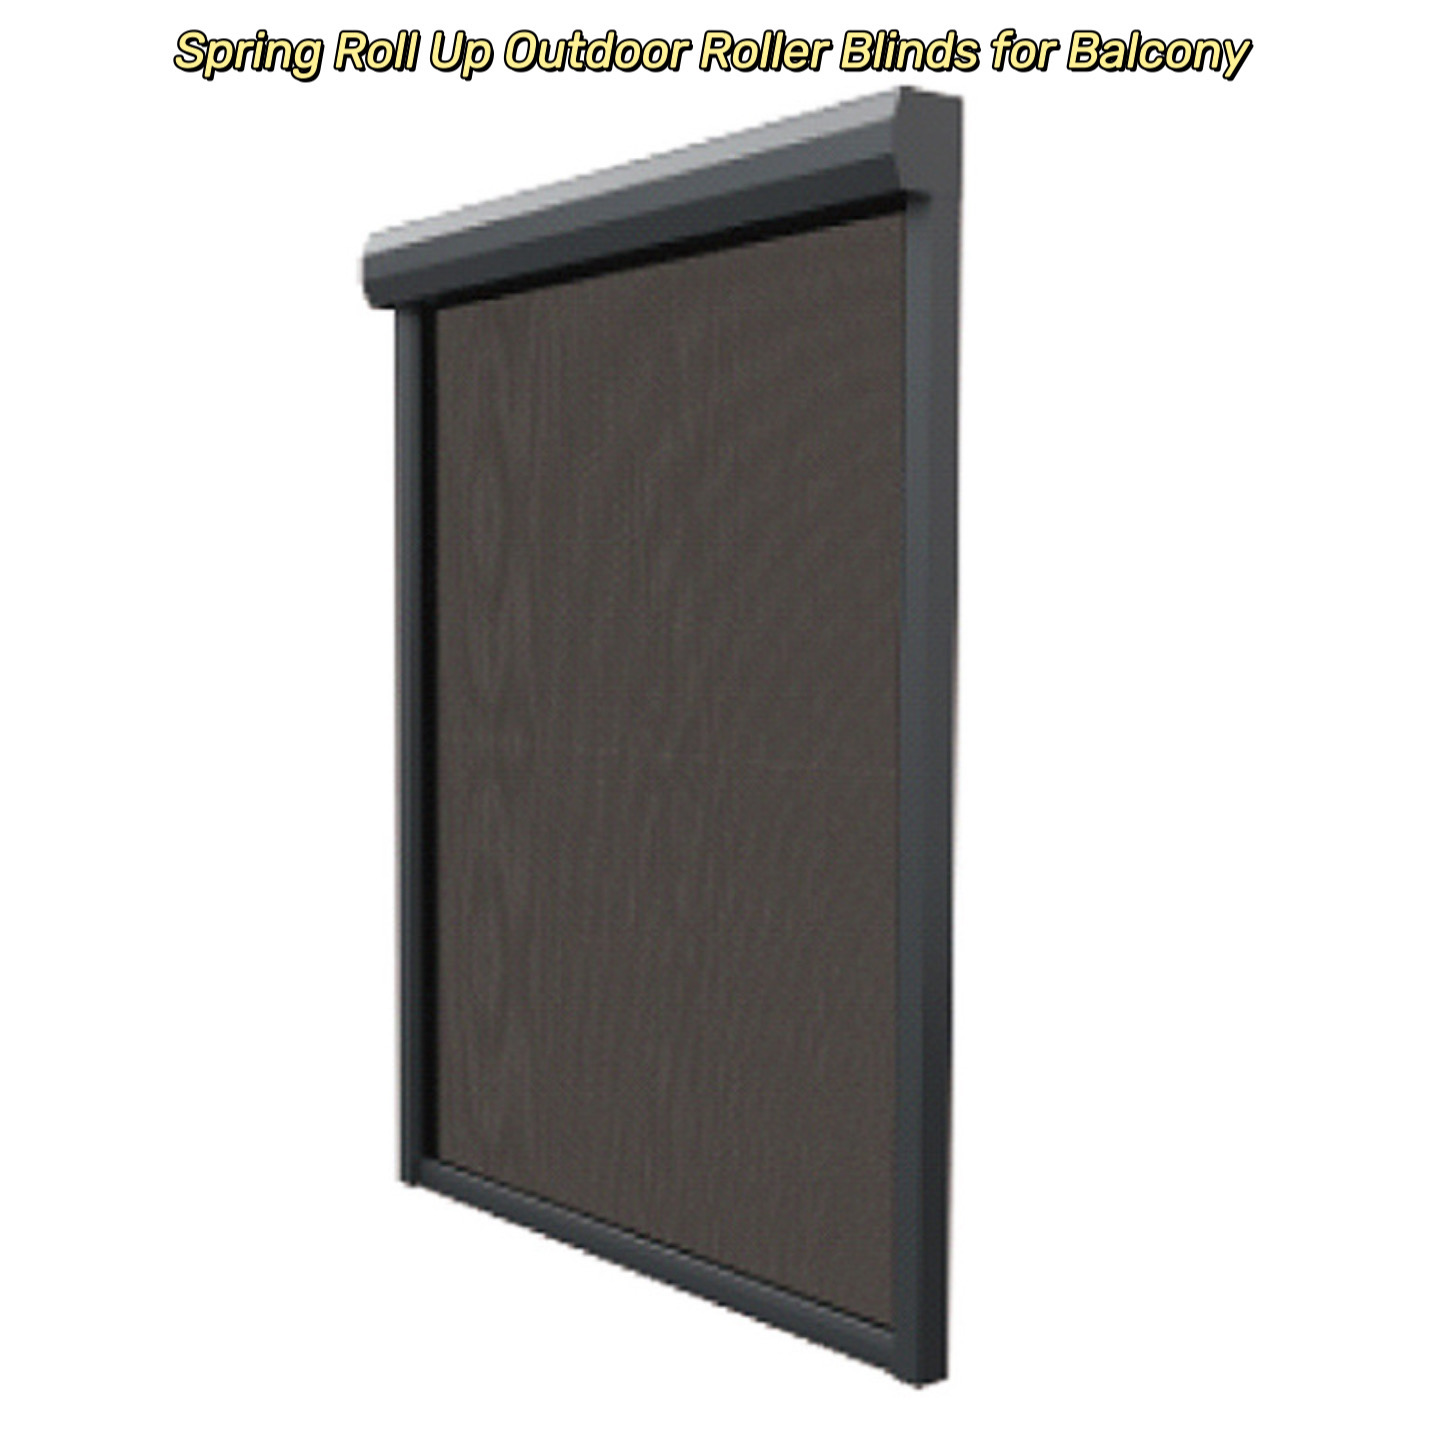 Spring Roll Up Outdoor Roller Blinds for Balcony